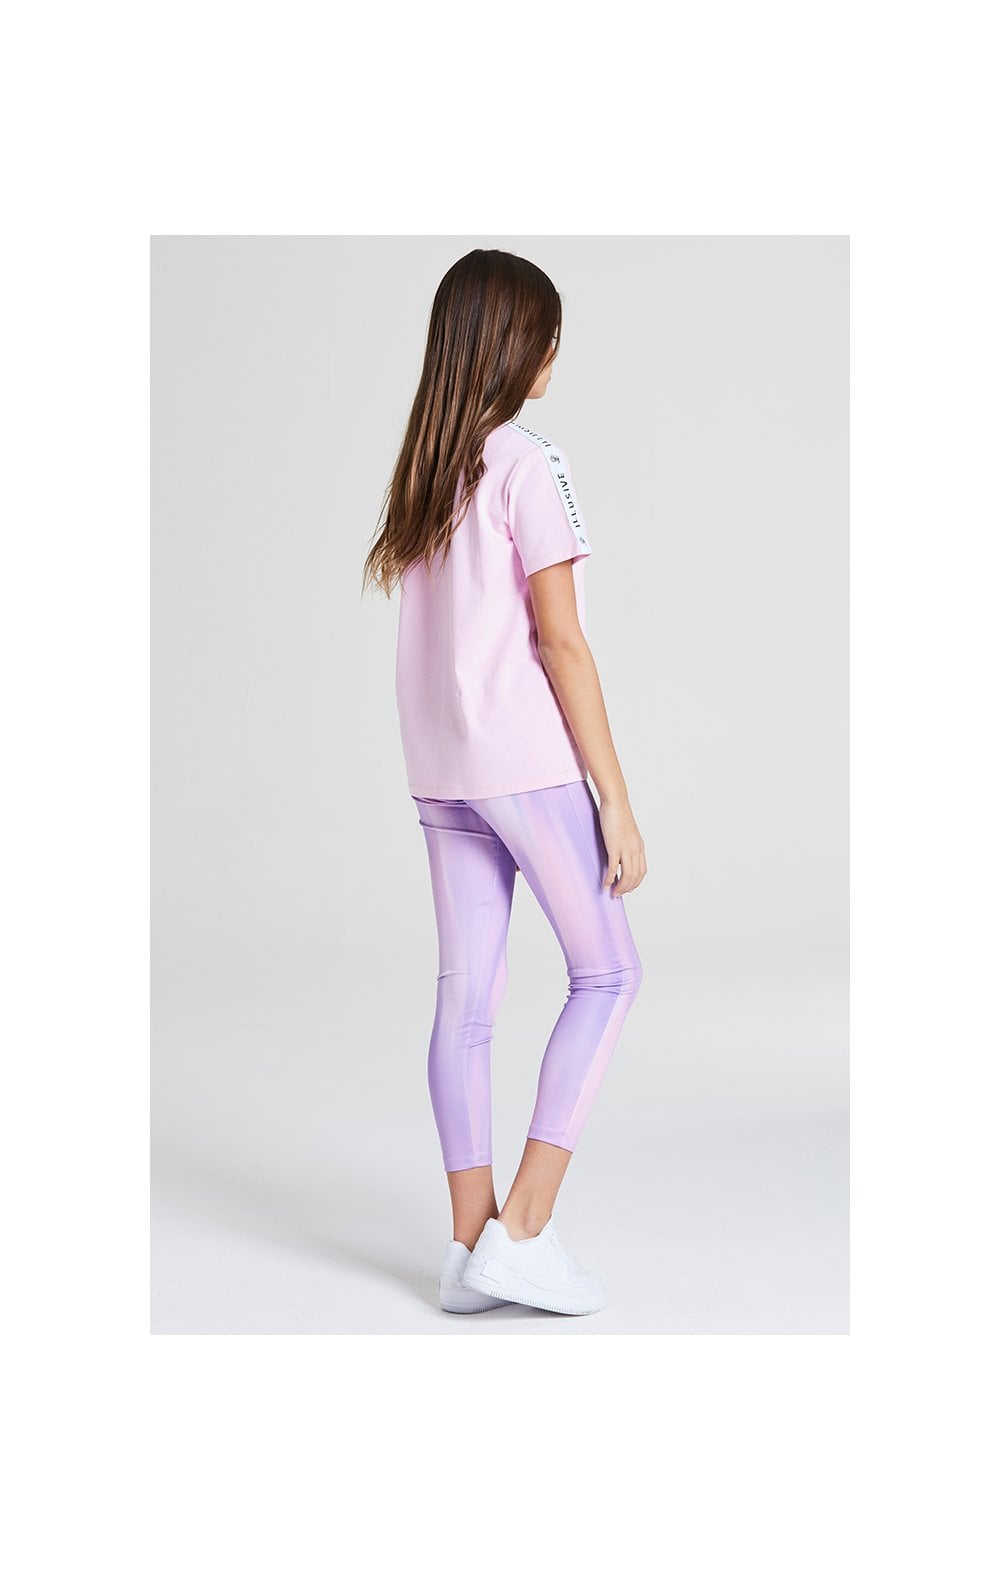 Illusive London BF Fit Taped Tee - Pink (3)